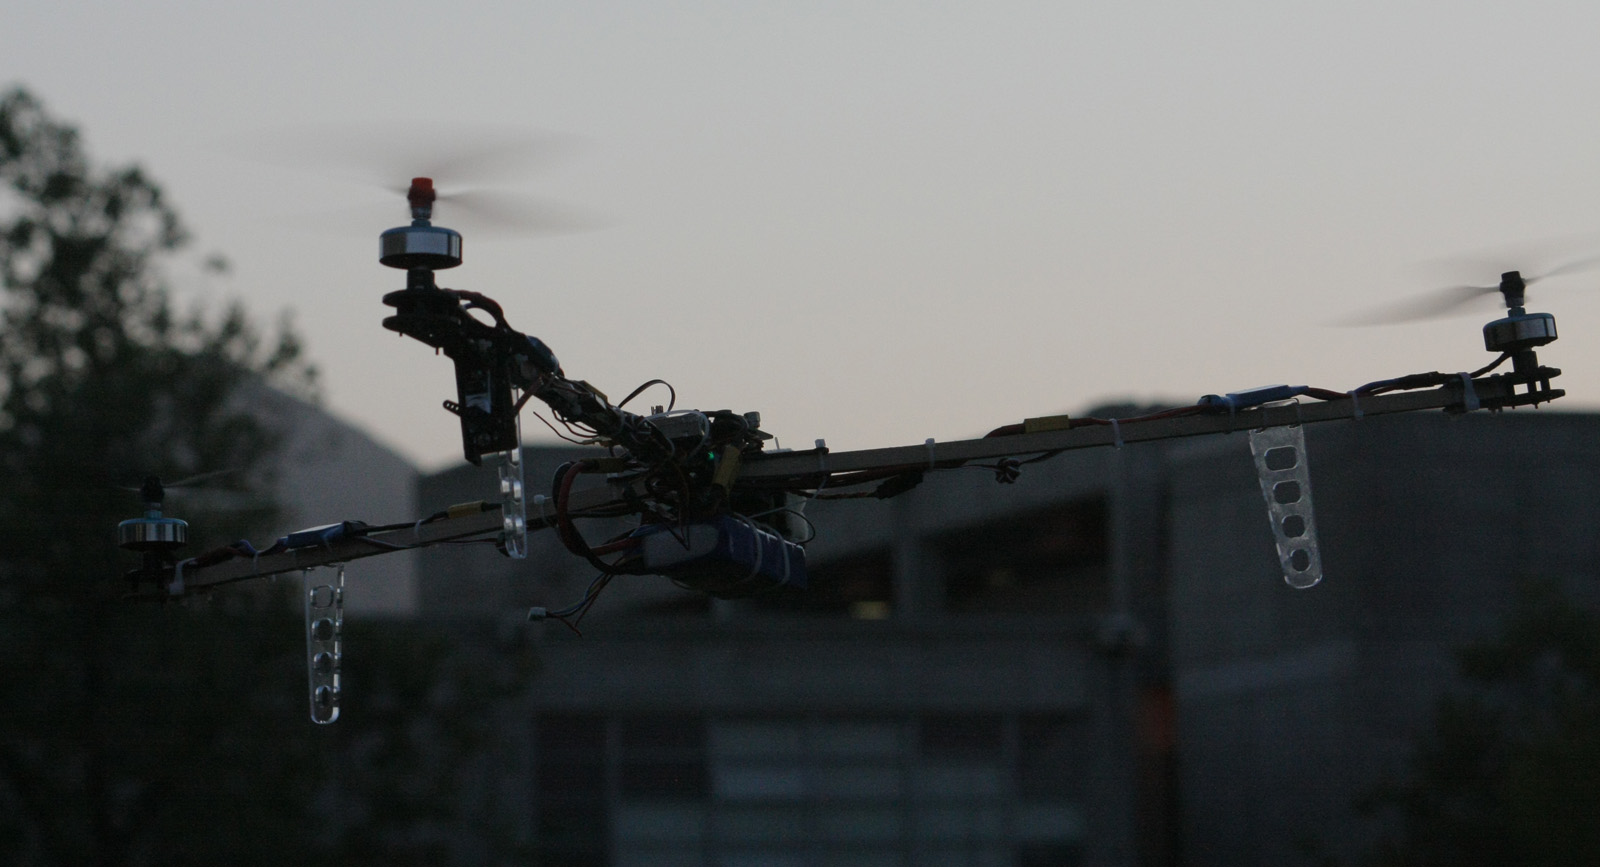 File:Tricopter-FPV-Inflight-Evening.jpg